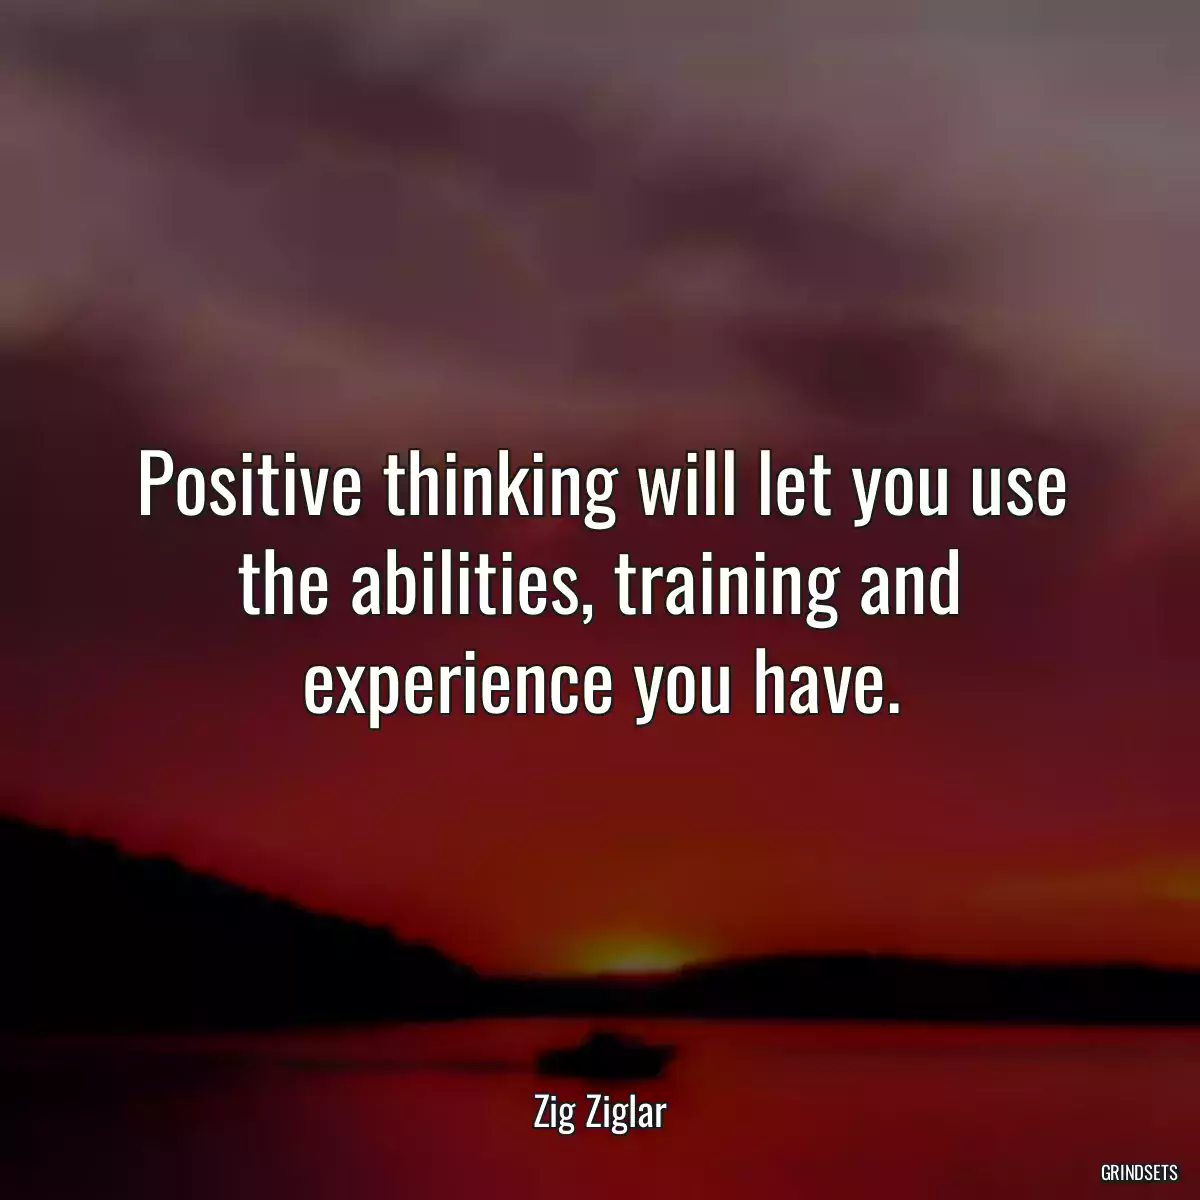 Positive thinking will let you use the abilities, training and experience you have.